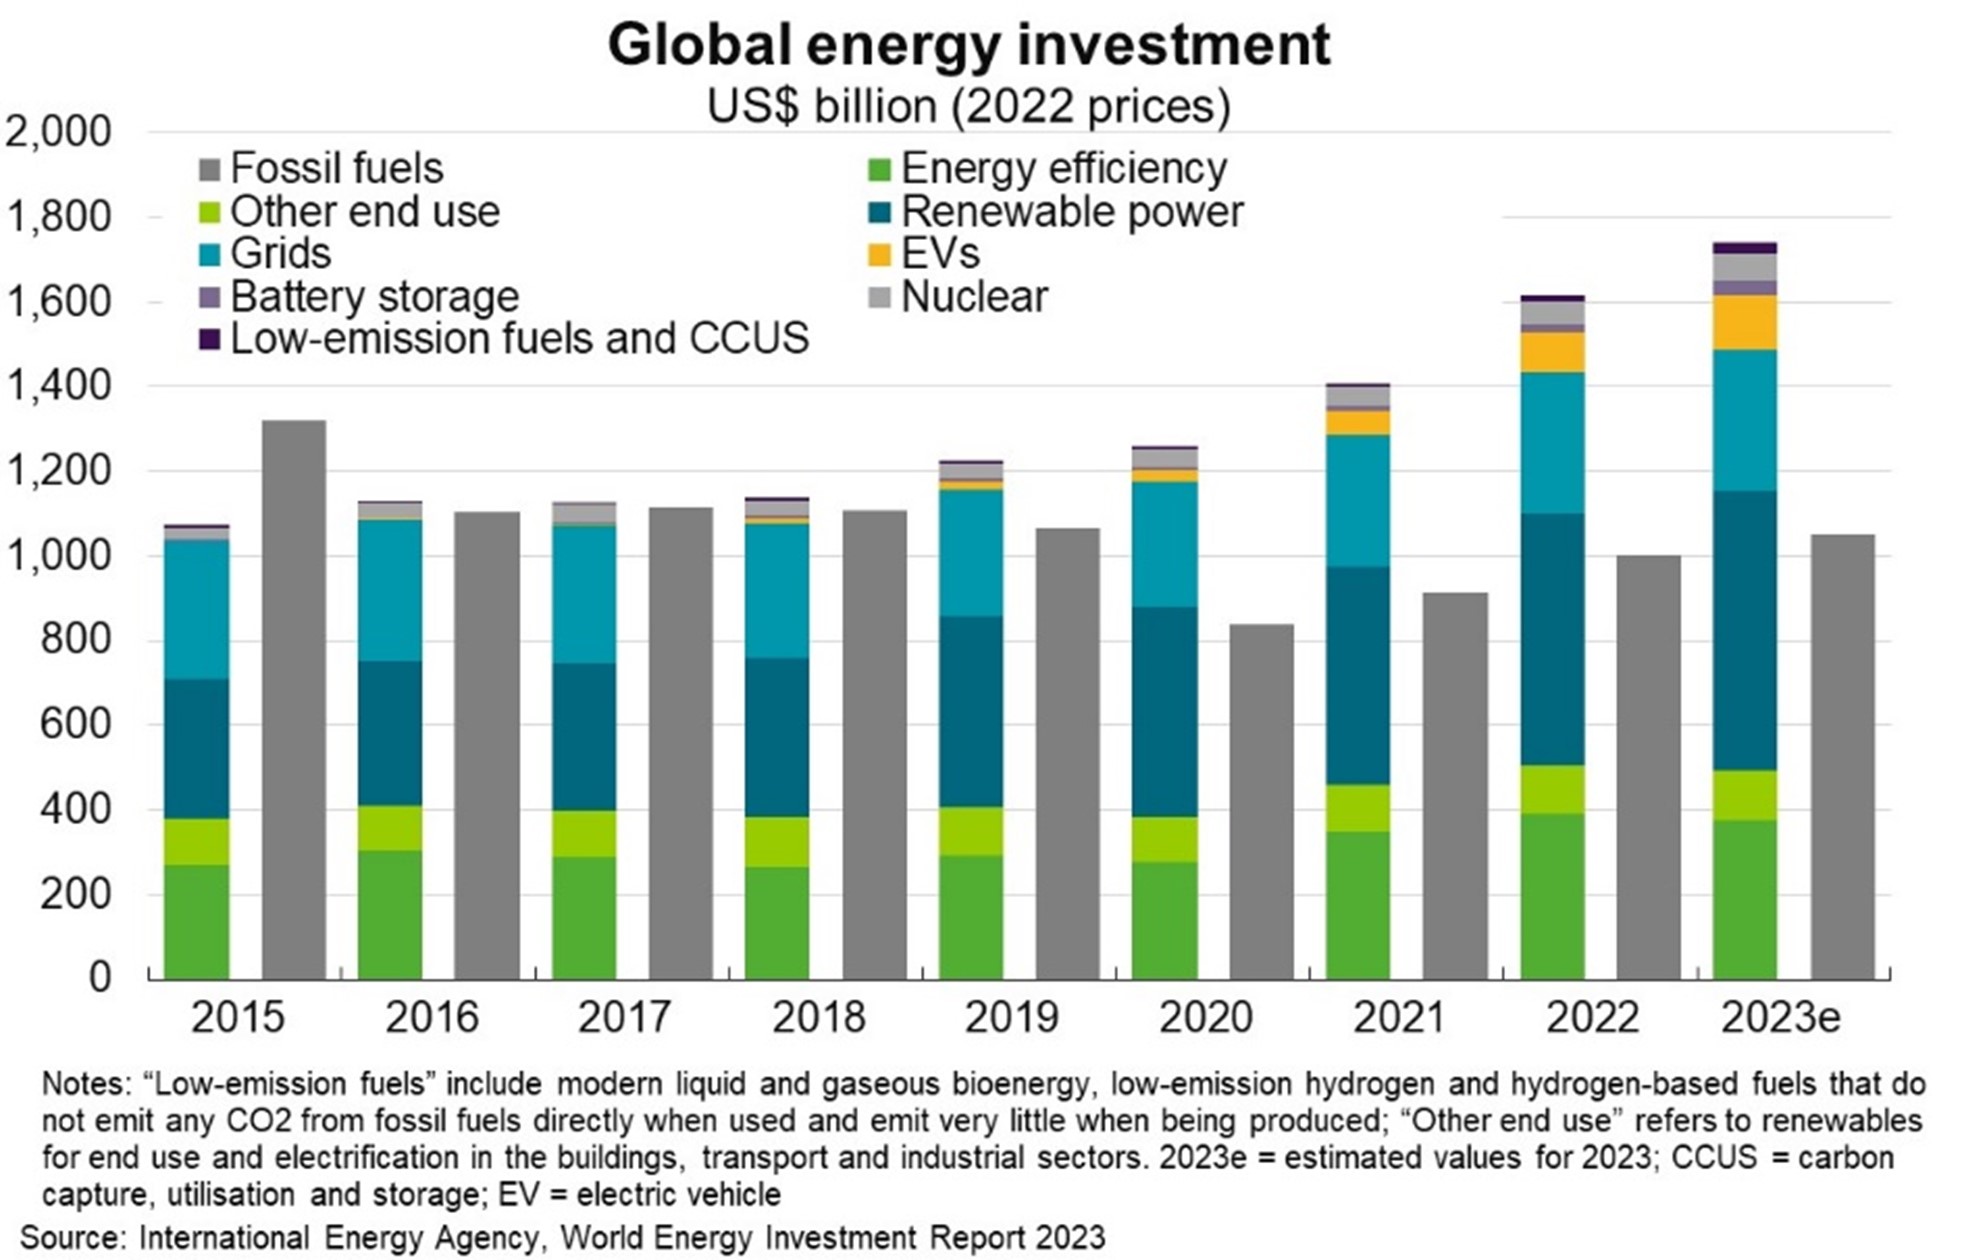 Global clean energy investment will hit a record US$1.7 trillion in 2023.